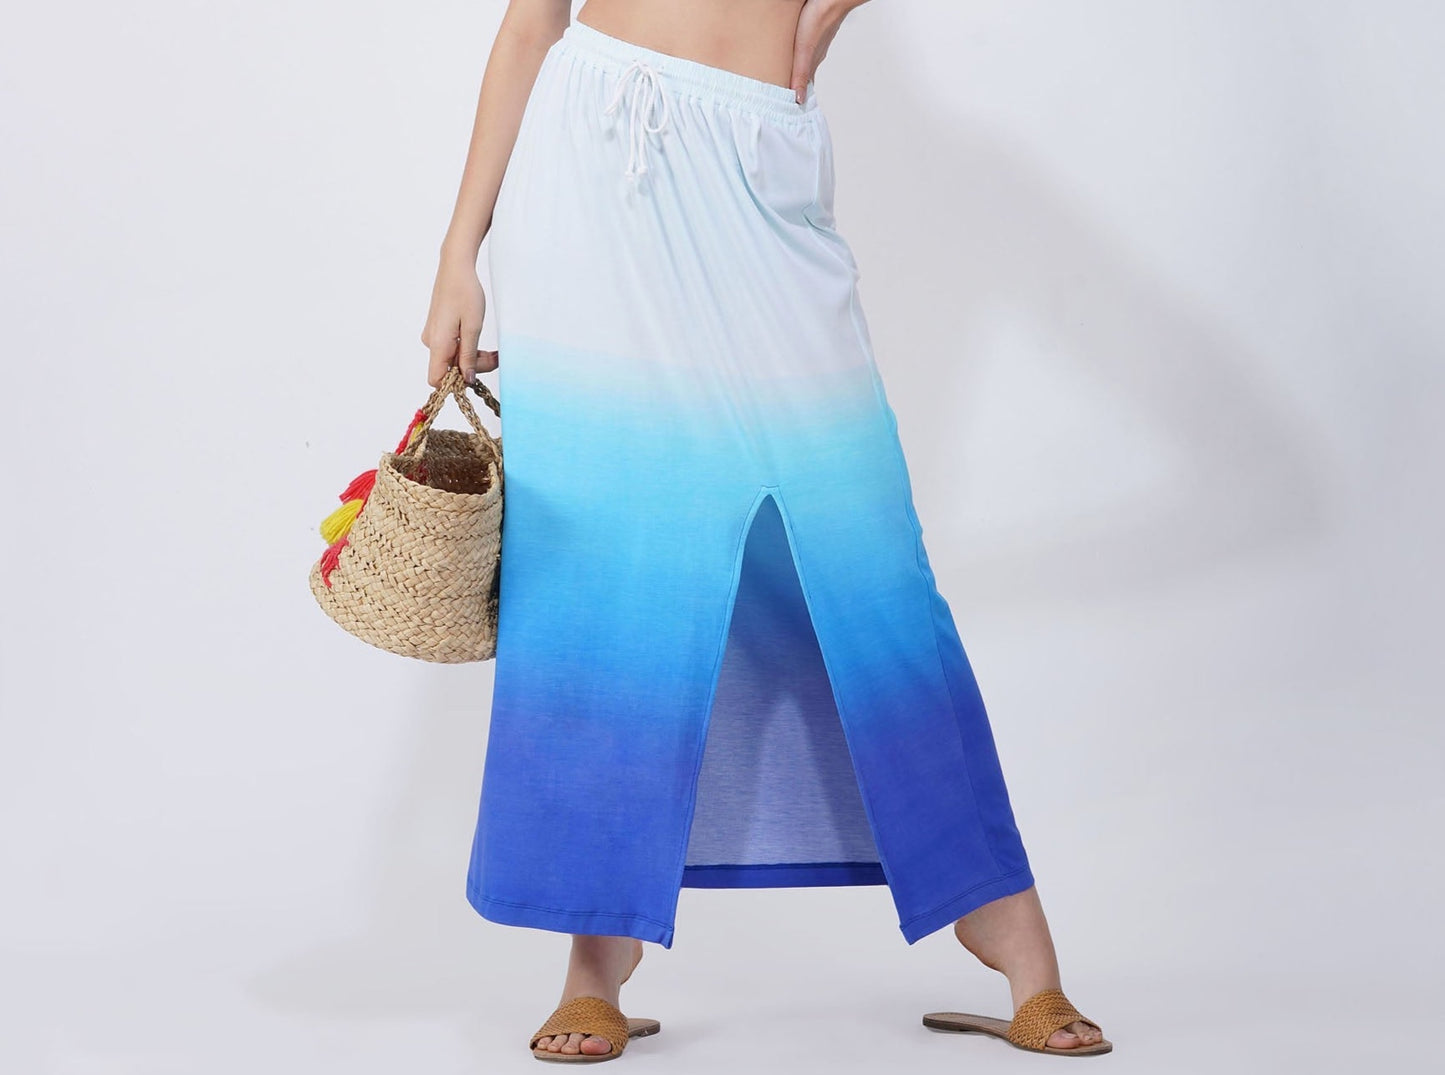 SLAY. Women's White to Blue Ombre Skirt with Slit